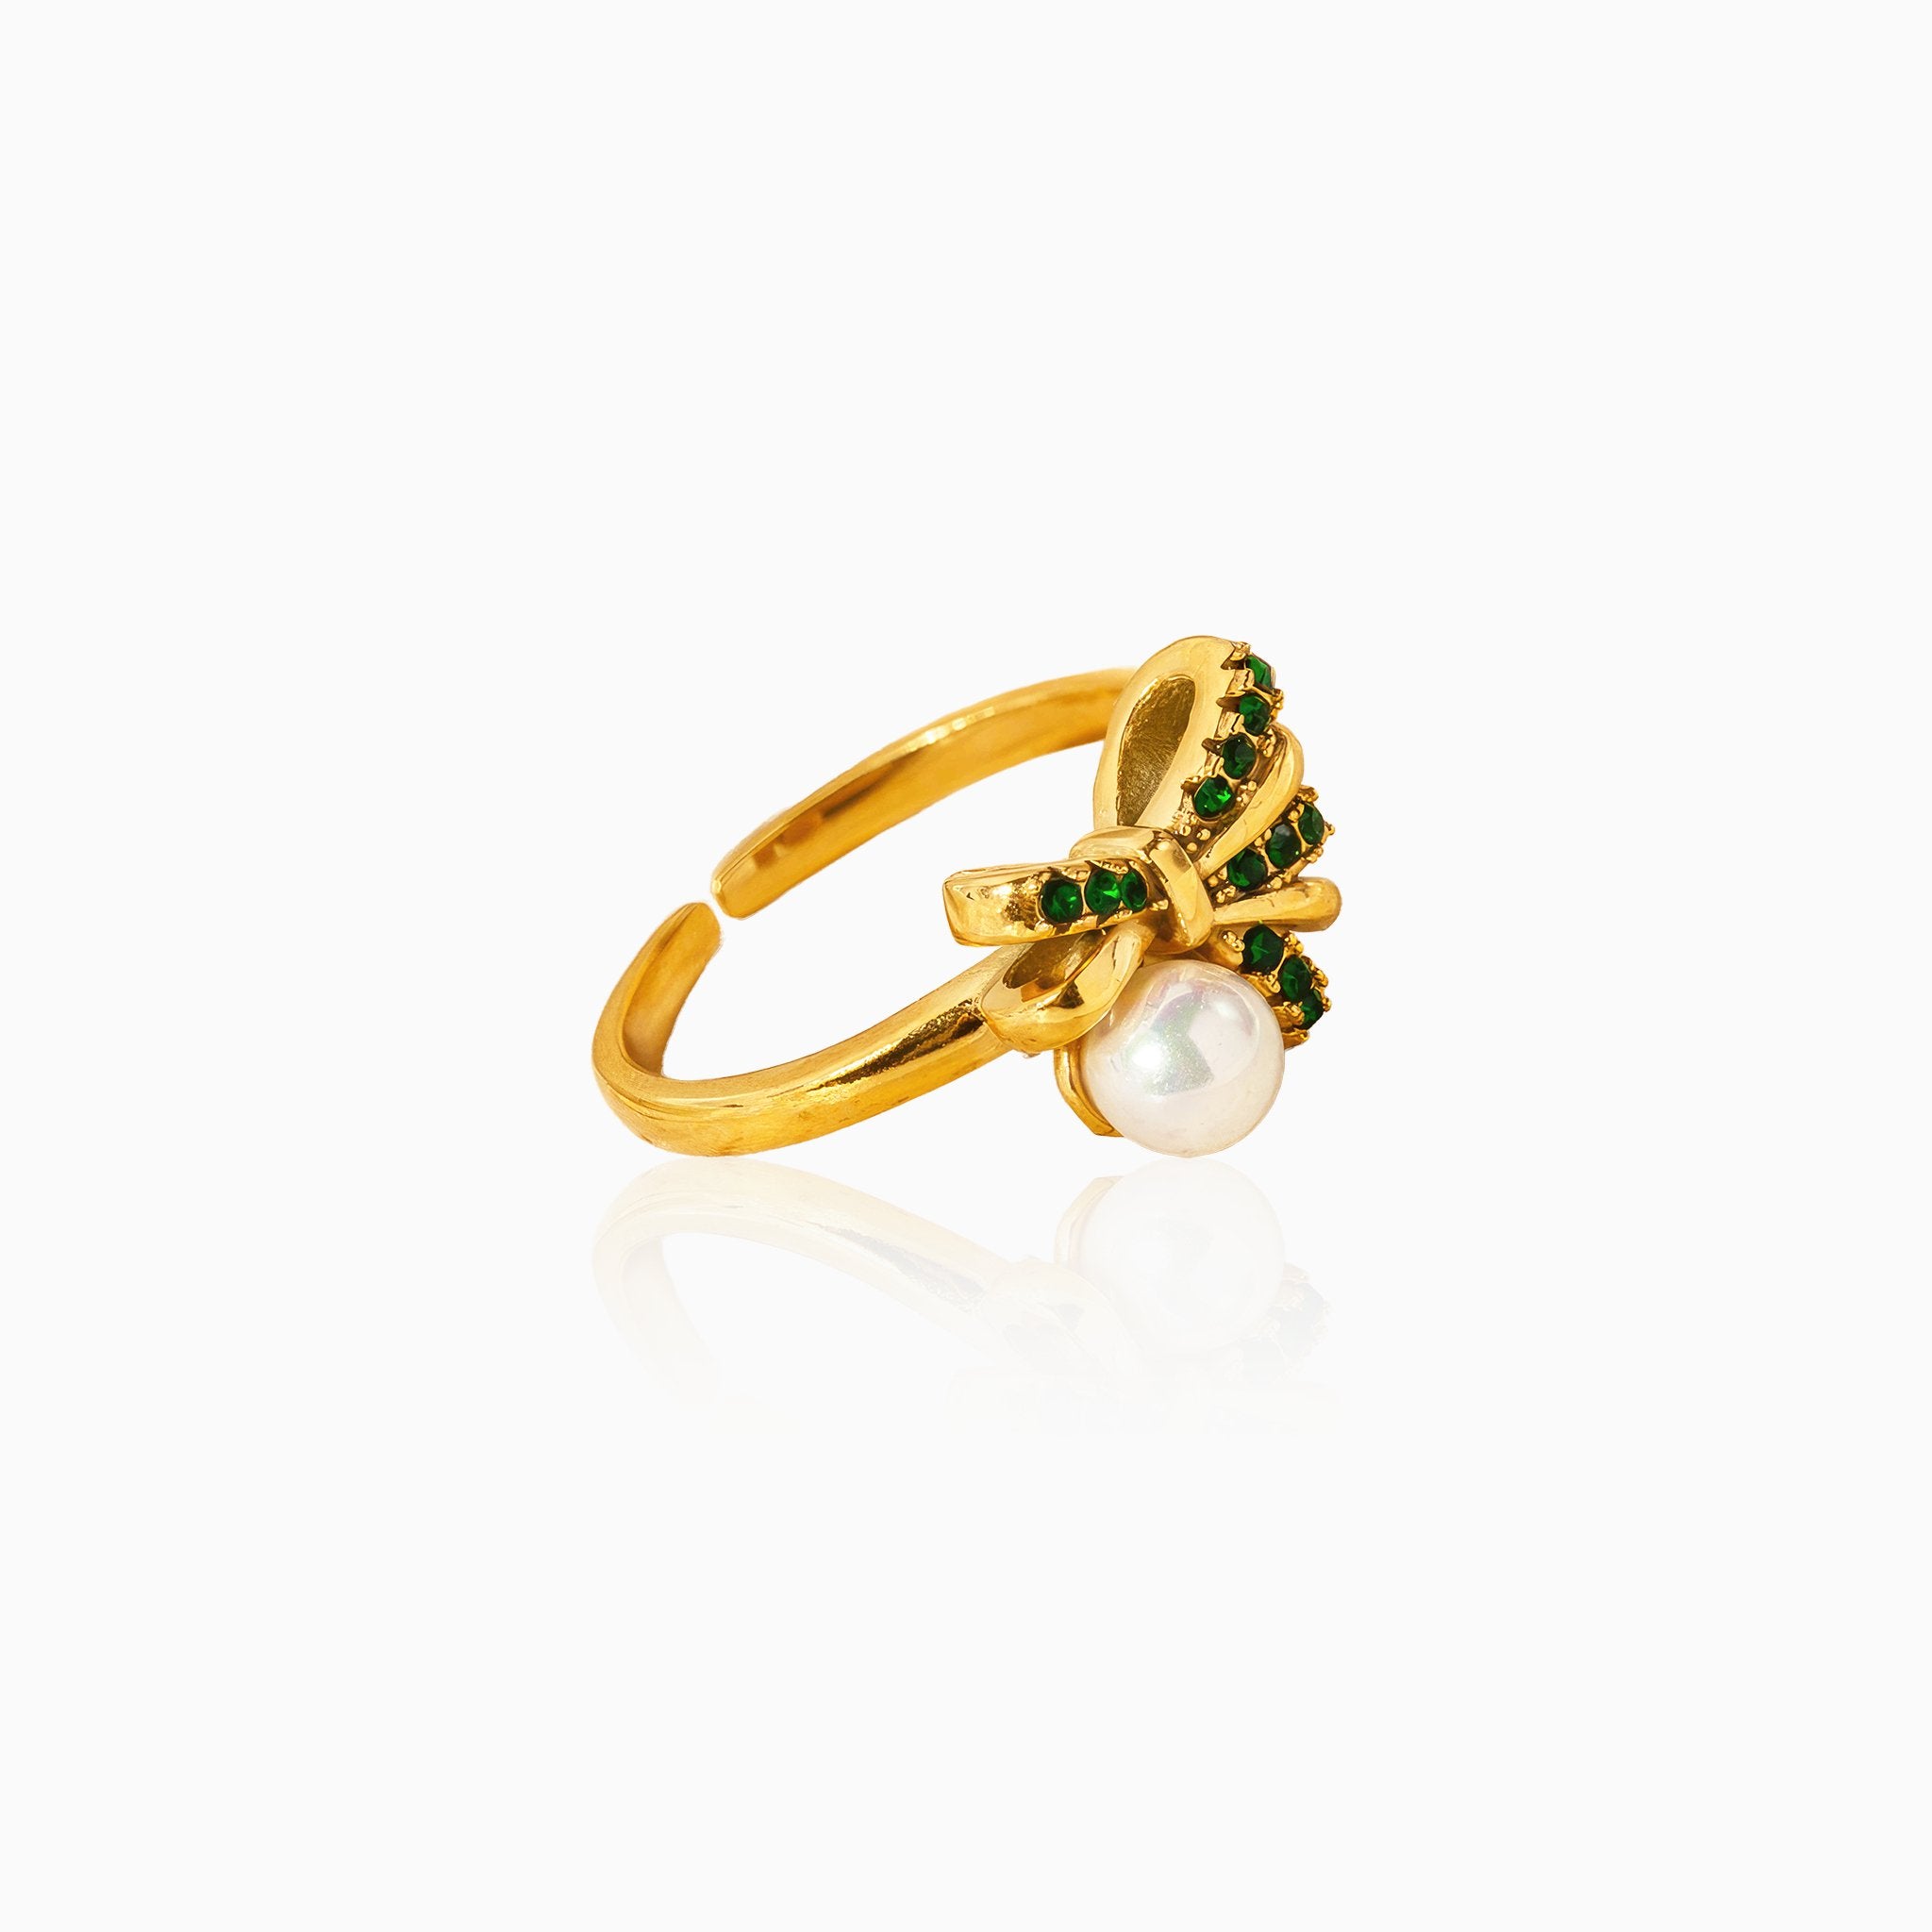 Elegant Bow Knot & Pearl Ring - Nobbier - Ring - 18K Gold And Titanium PVD Coated Jewelry